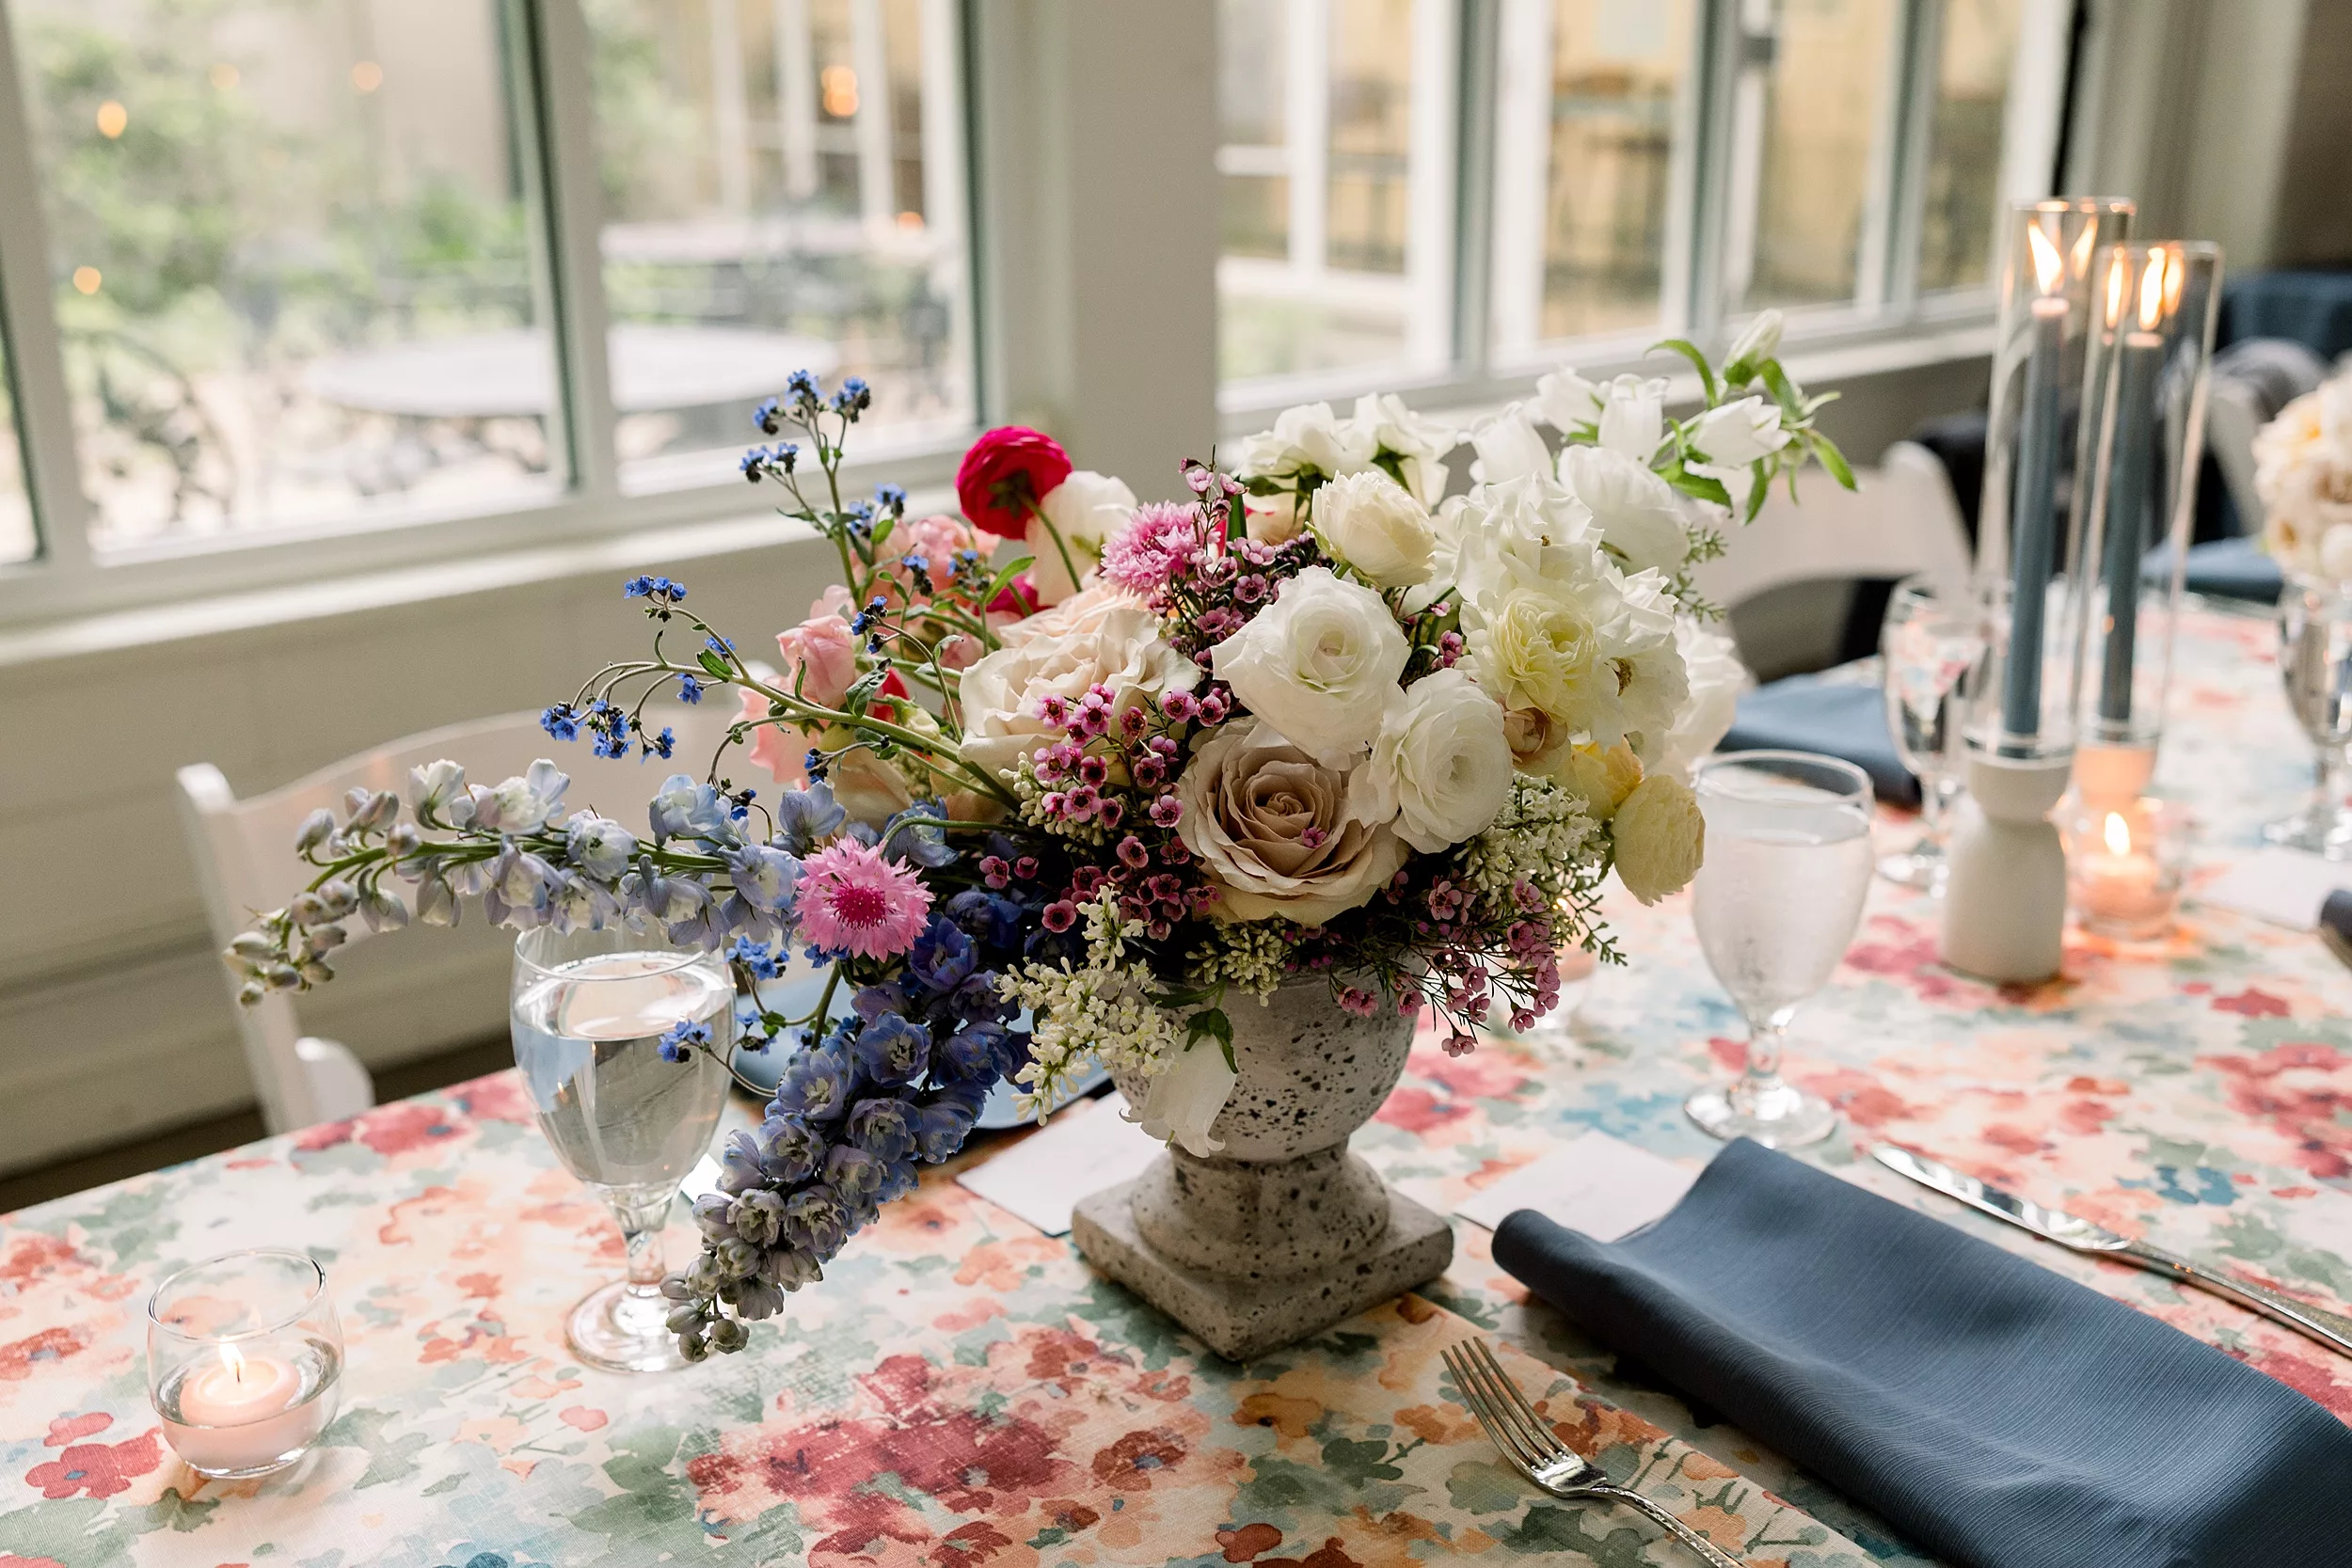 Details of a colorful table setting for a wedding reception with floral print linens and colorful flowers at a Cator Woolford Gardens Elopement